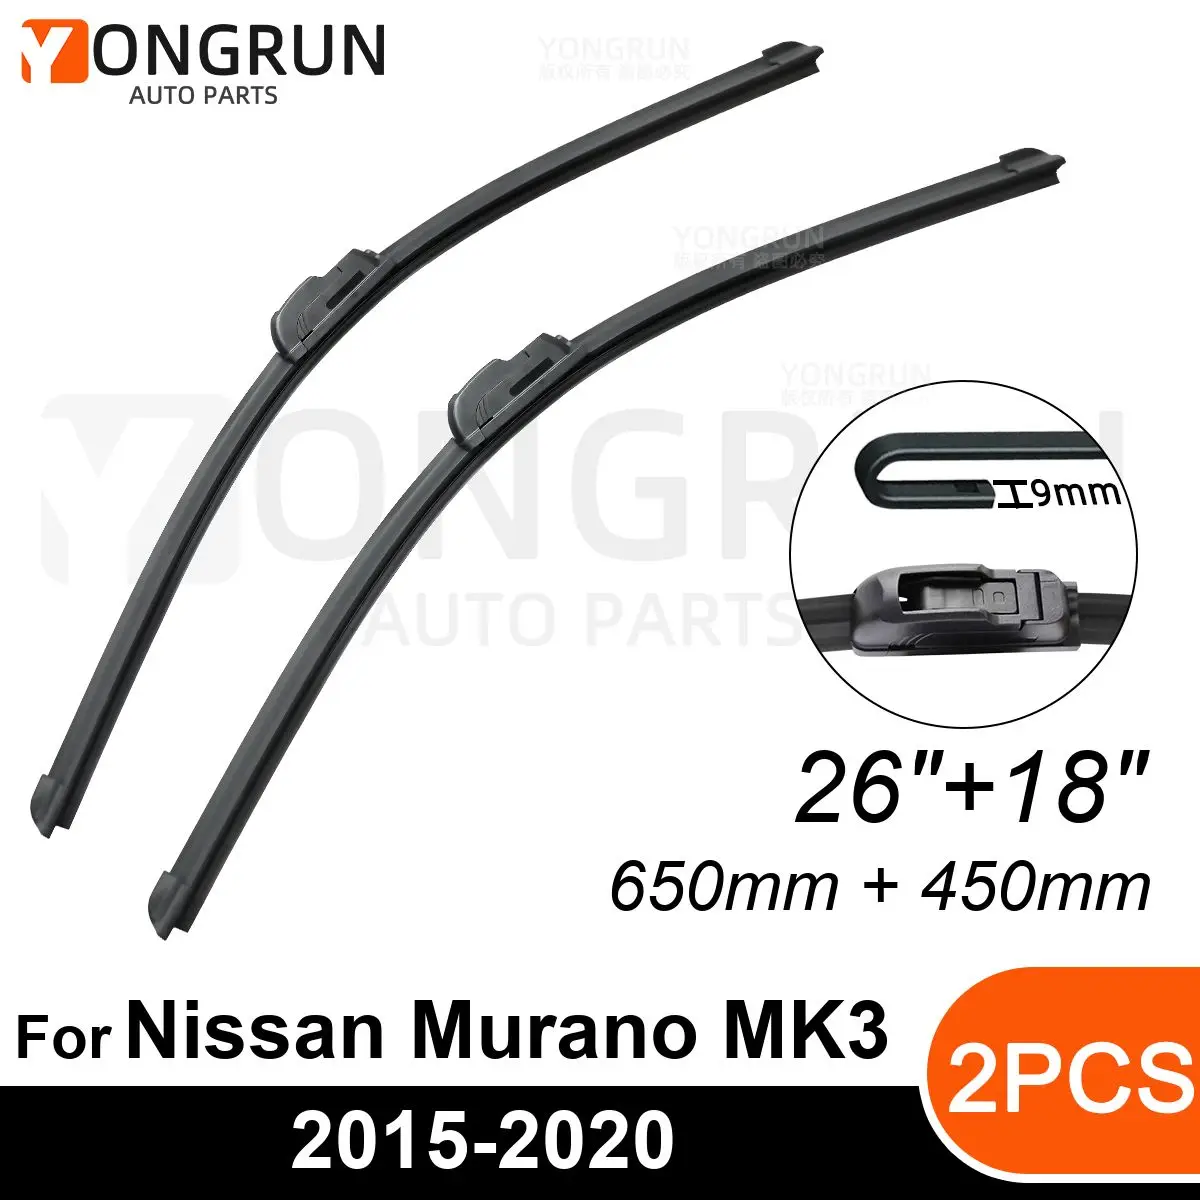 

Front Wipers For Nissan Murano MK3 2015-2020 Wiper Blade Rubber 26"+18" Car Windshield Windscreen Accessories2016 2017 2018 2019